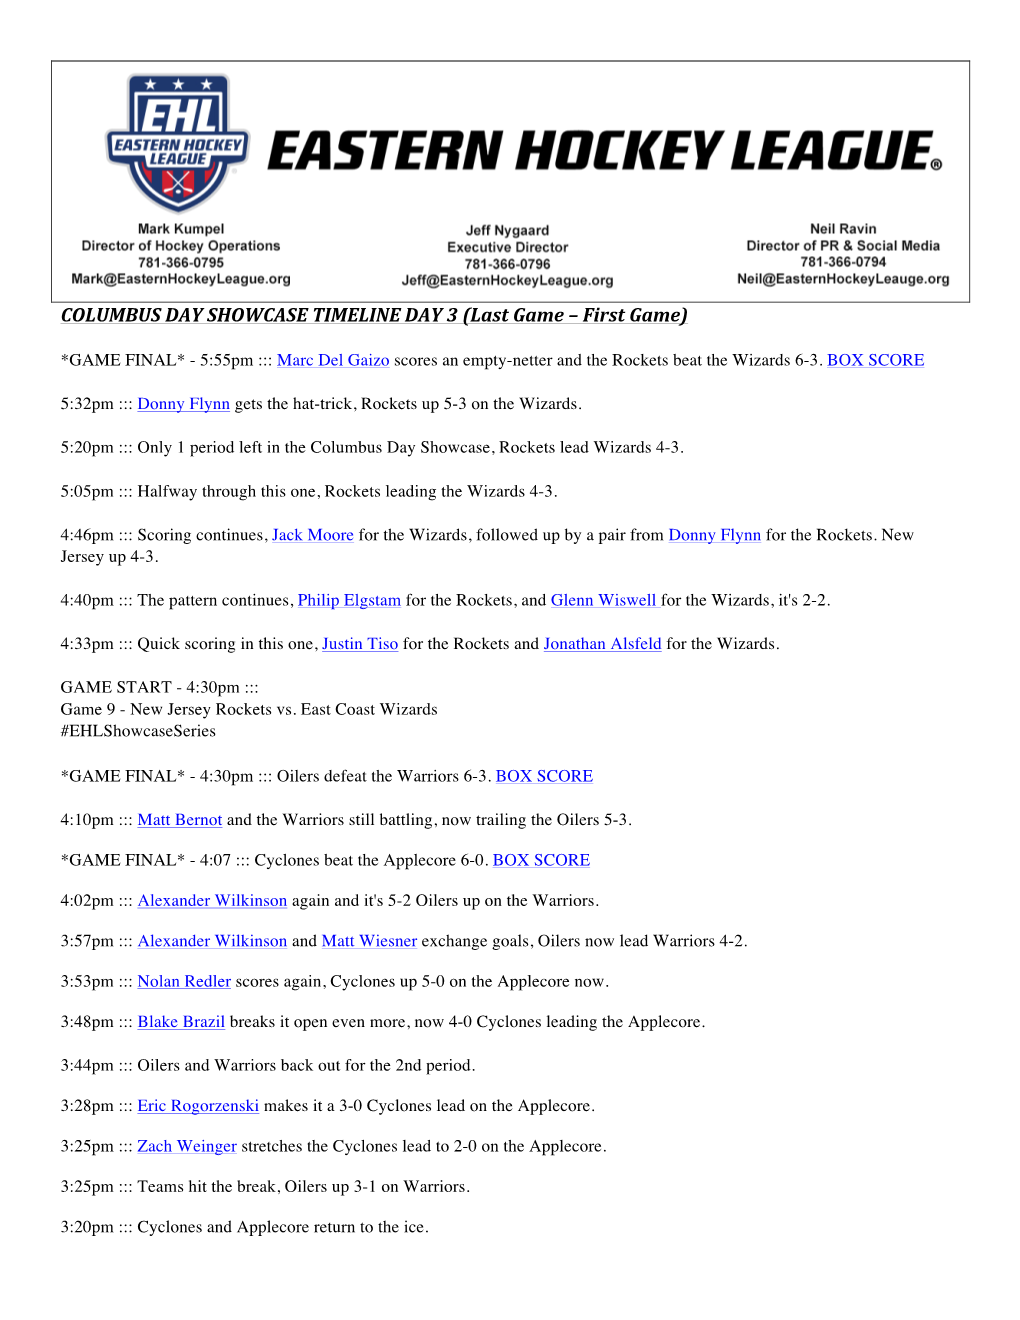 COLUMBUS DAY SHOWCASE TIMELINE DAY 3 (Last Game – First Game)